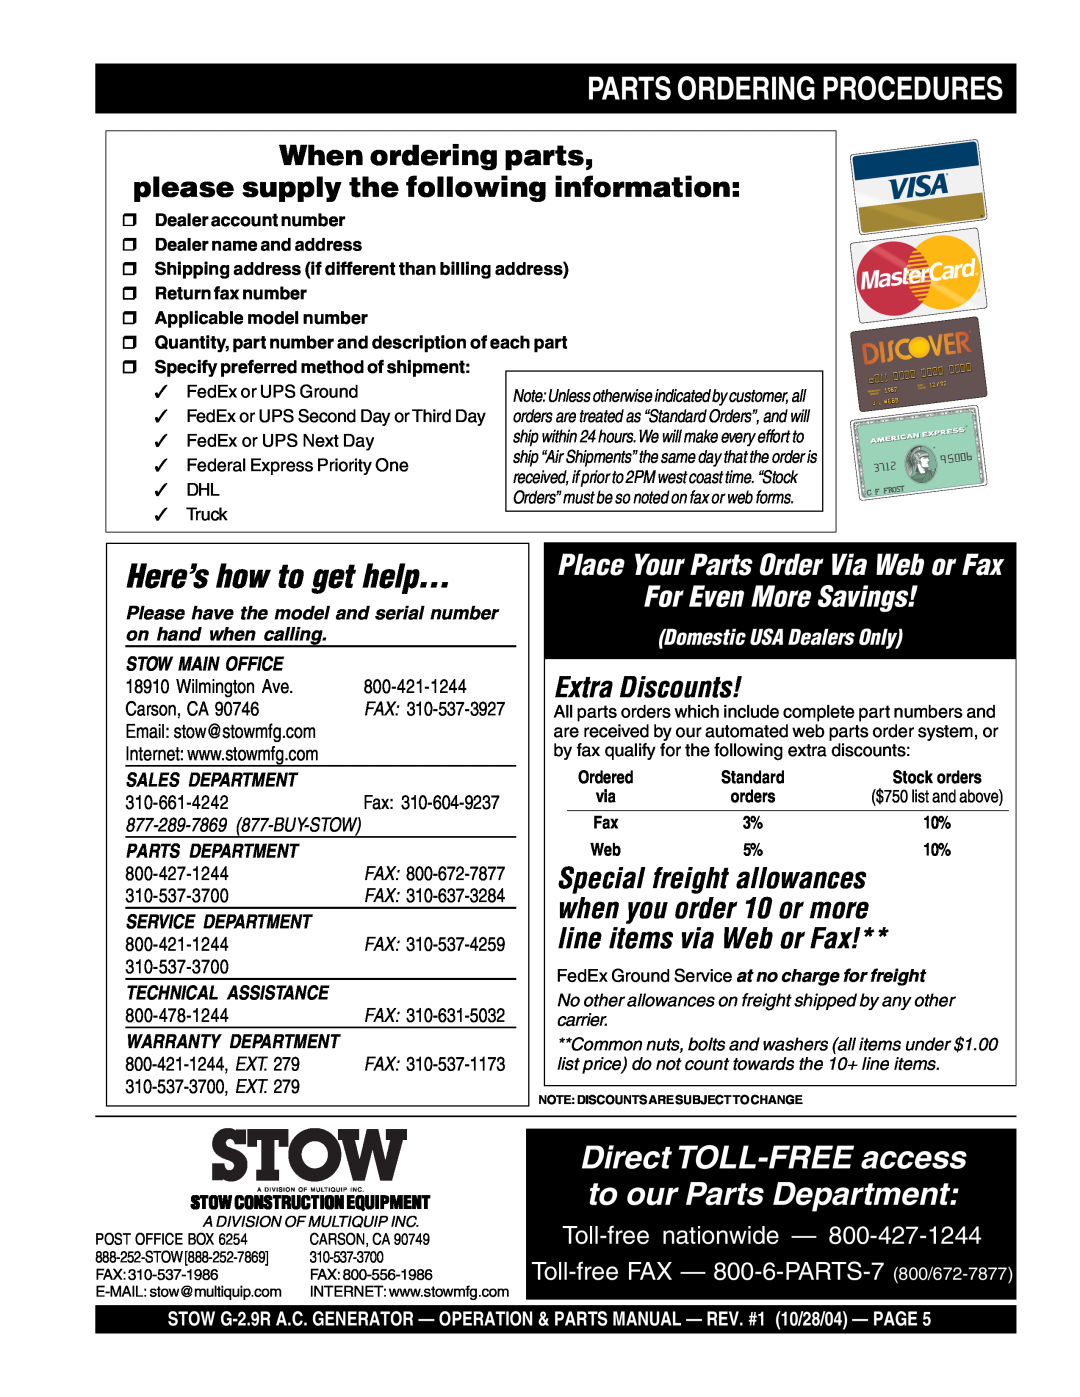 Stow G-2.9R Parts Ordering Procedures, Extra Discounts, Here’s how to get help, Toll-free nationwide, Stow Main Office 